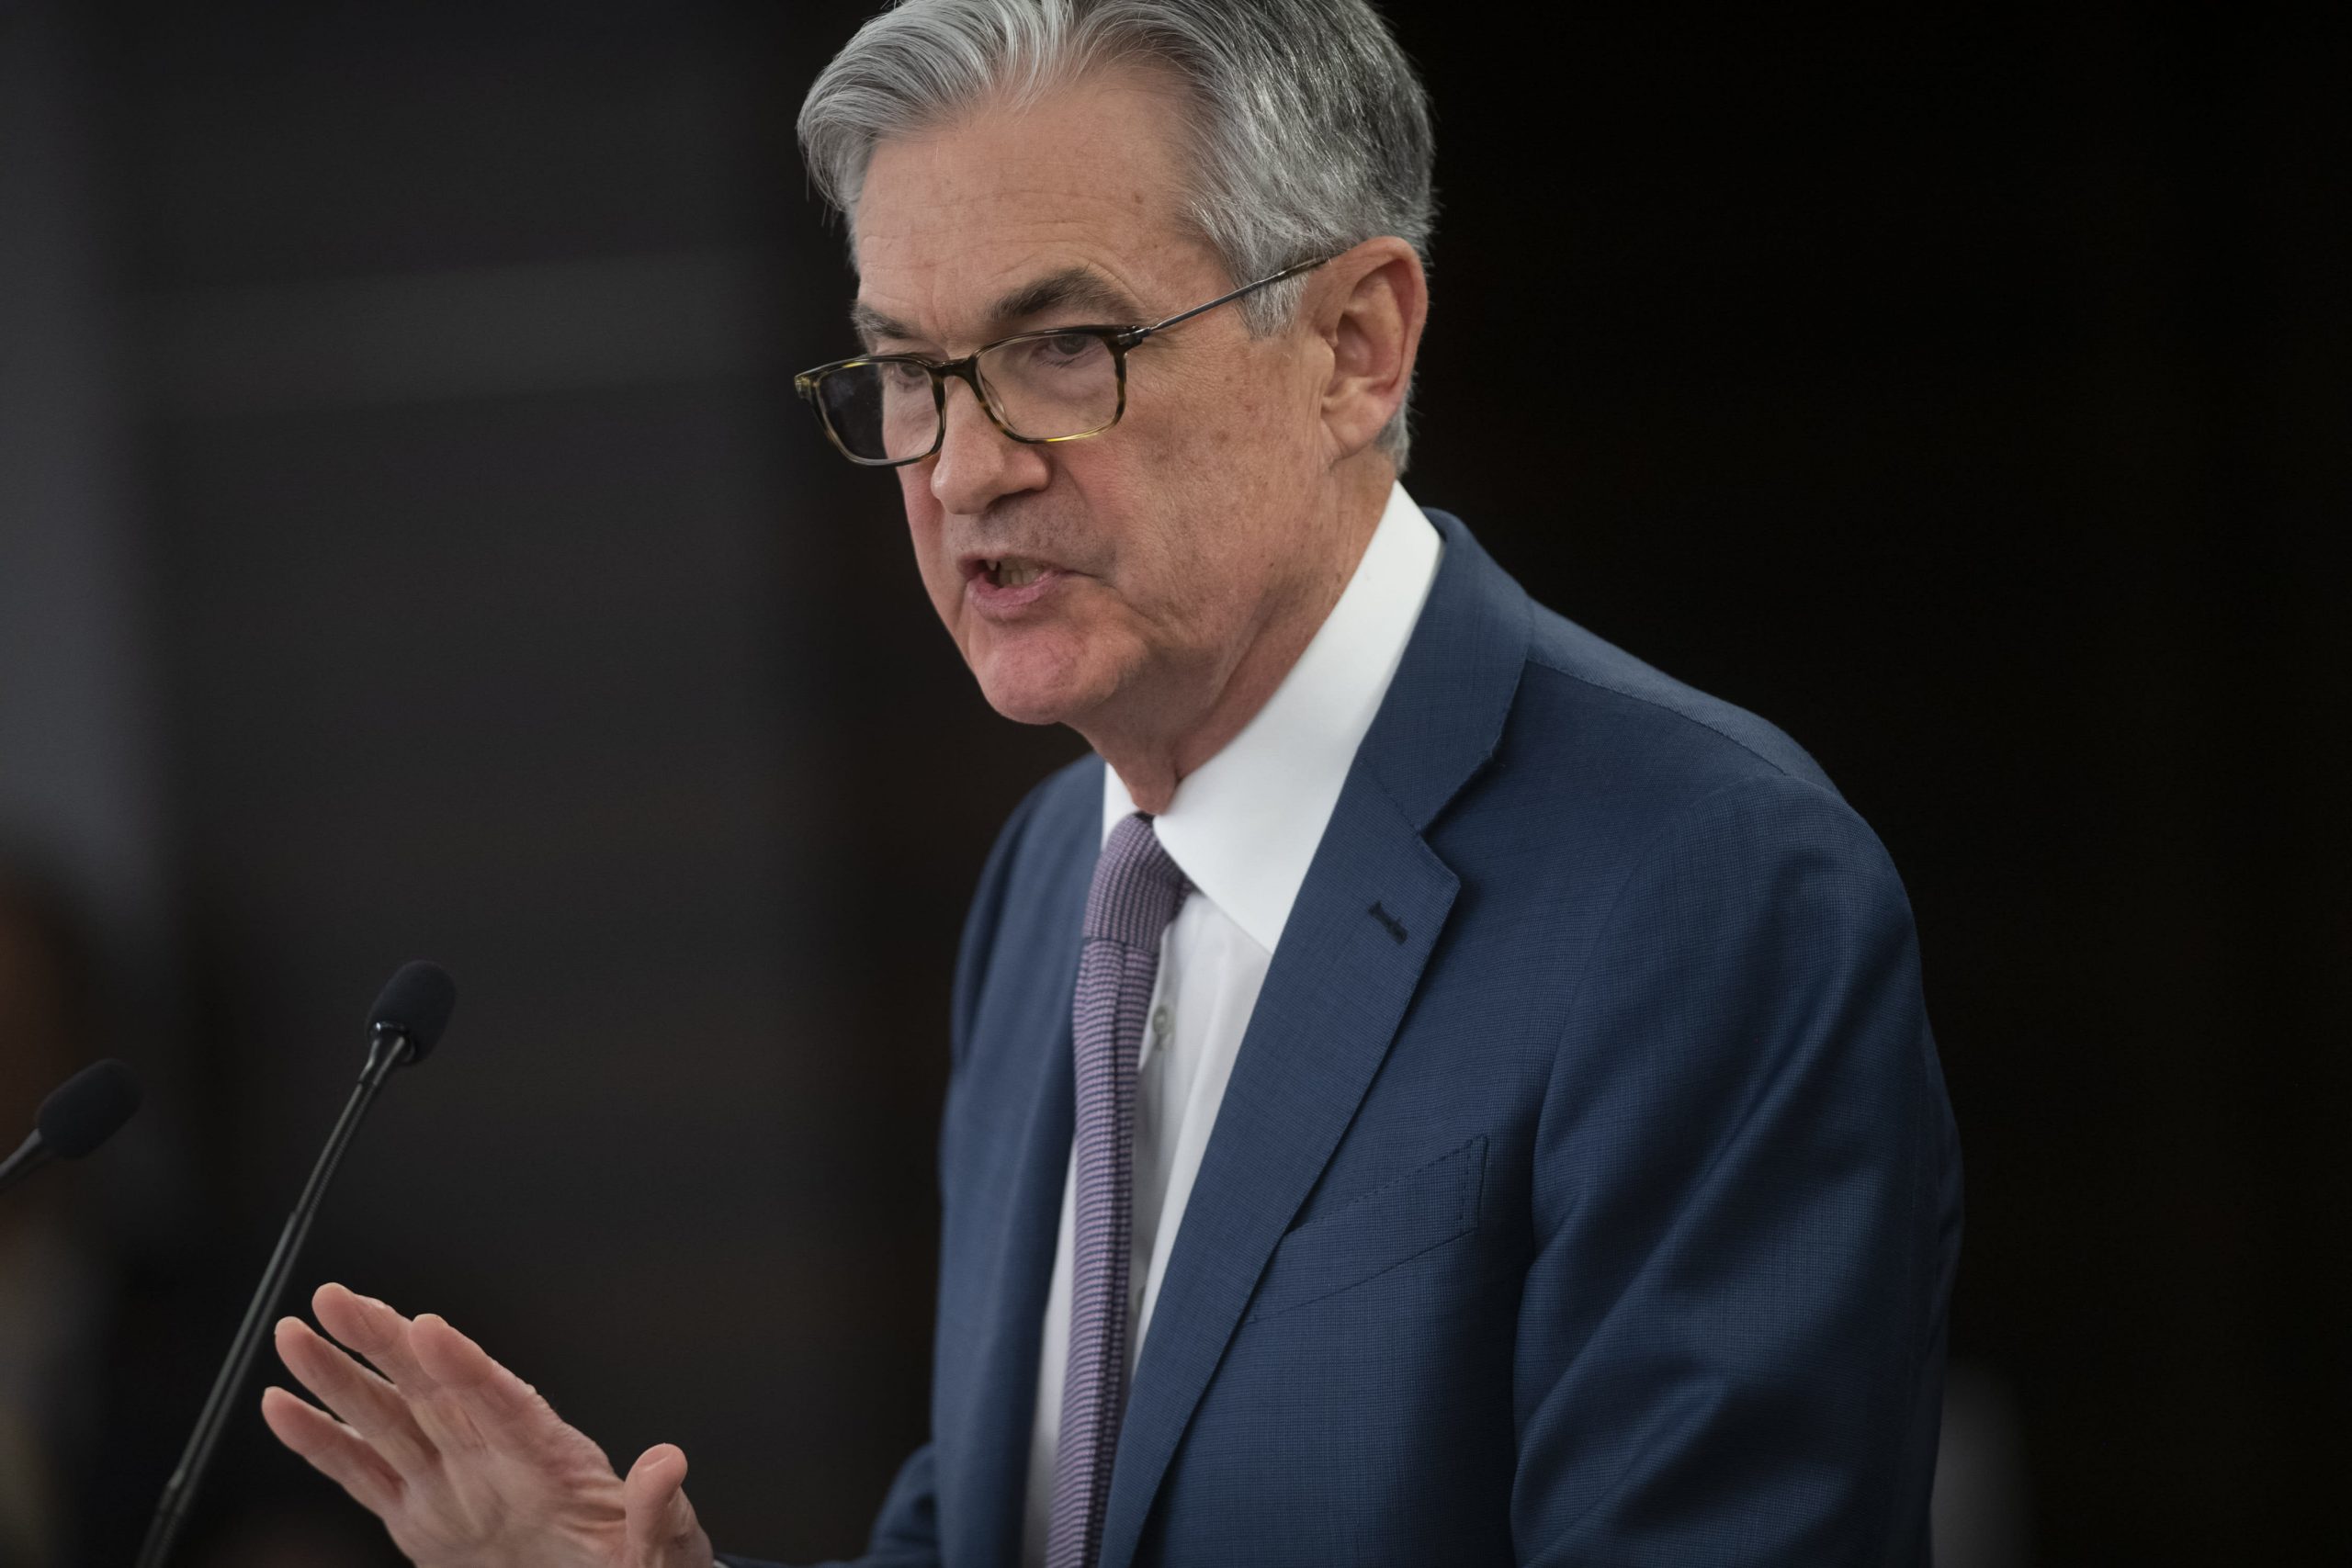 Federal Reserve to Suspend until 2023: CNBC Review